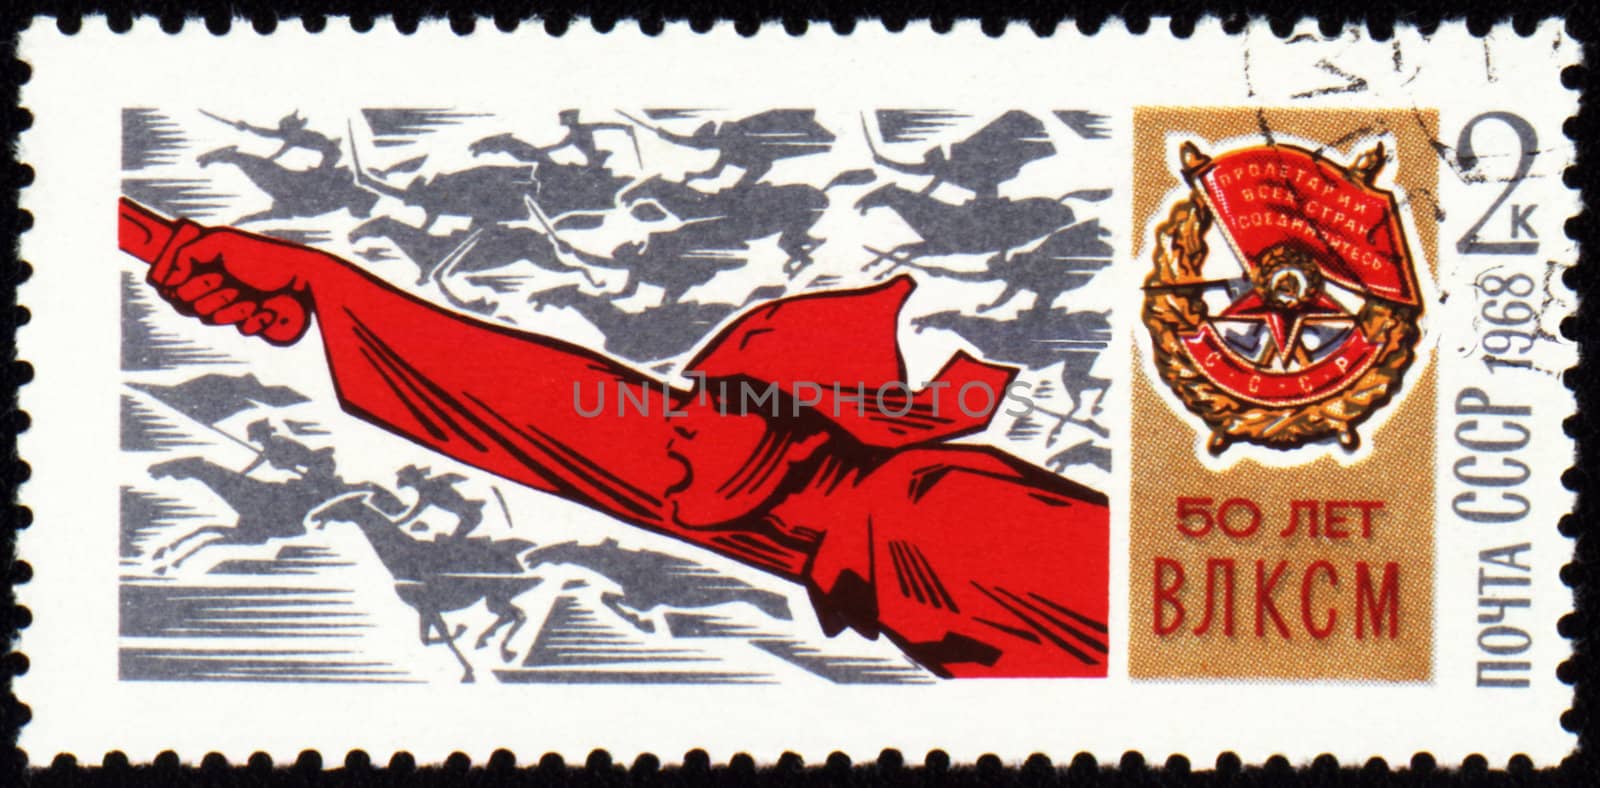 USSR - CIRCA 1968: A stamp printed in USSR, shows riding on a horse soldier with a sword and Order of the Red Banner, devoted to the 50-th anniversary VLKSM, circa 1968